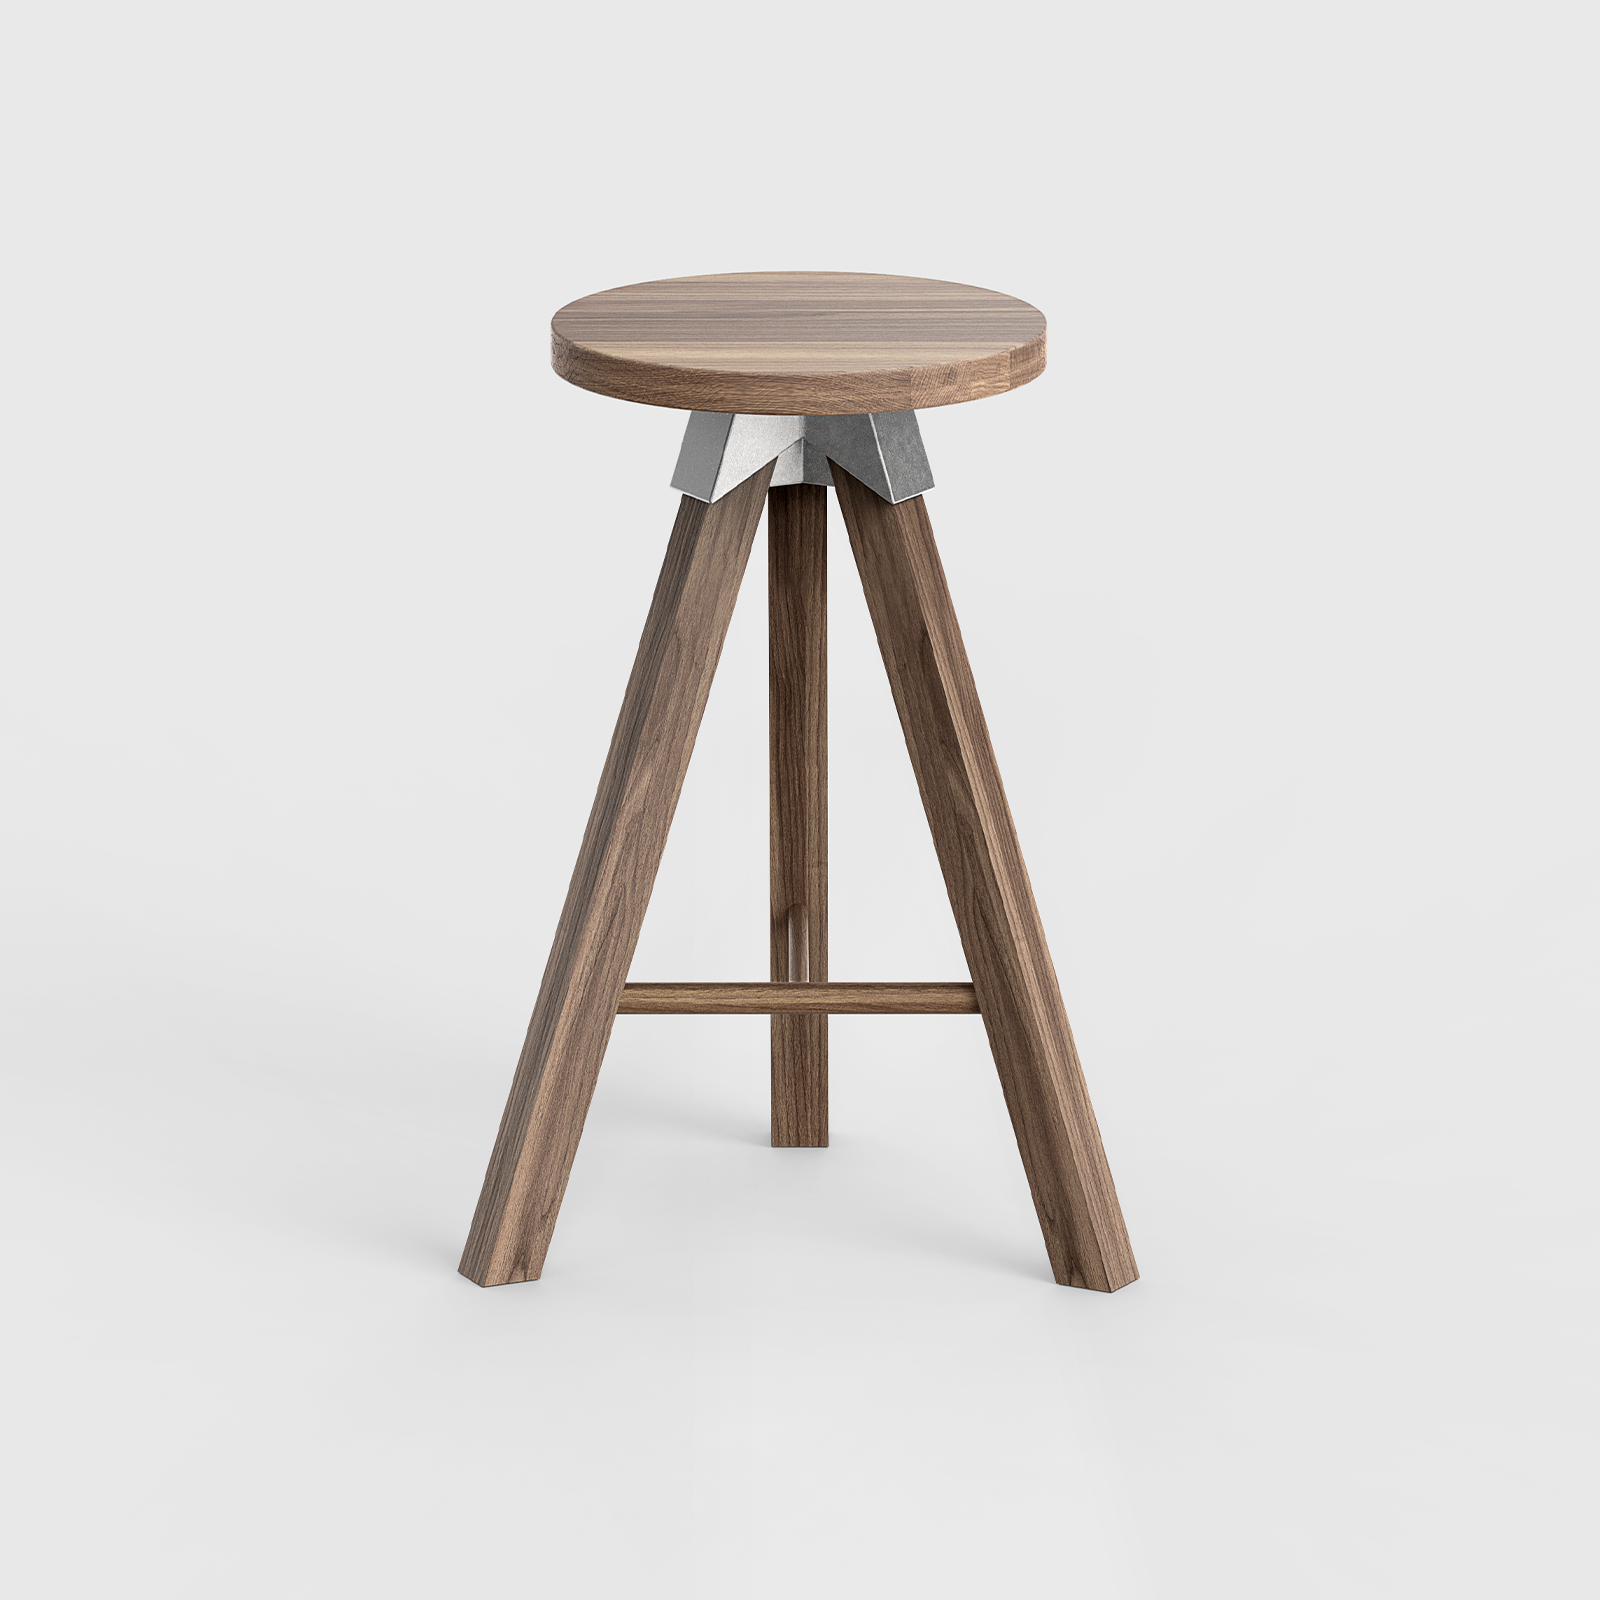 A-joint tall stool in solid American Walnut with cast aluminium A-joint